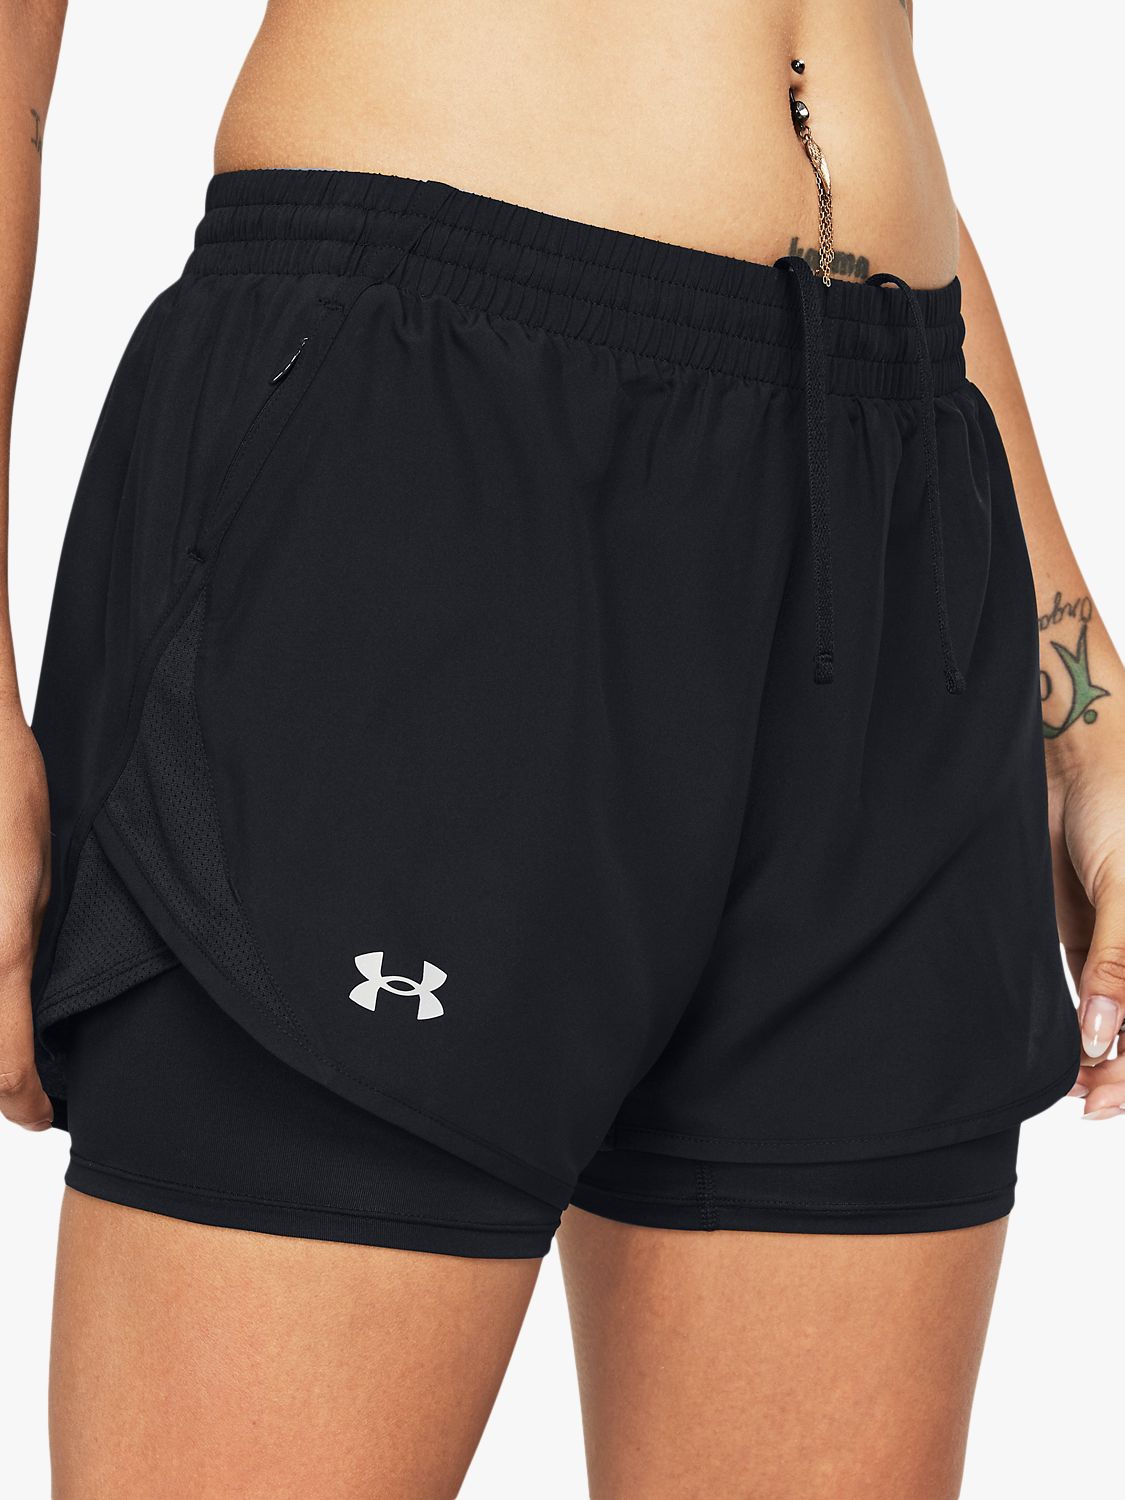 Under Armour Fly B 2 in 1 Shorts, Black/Reflective, XS